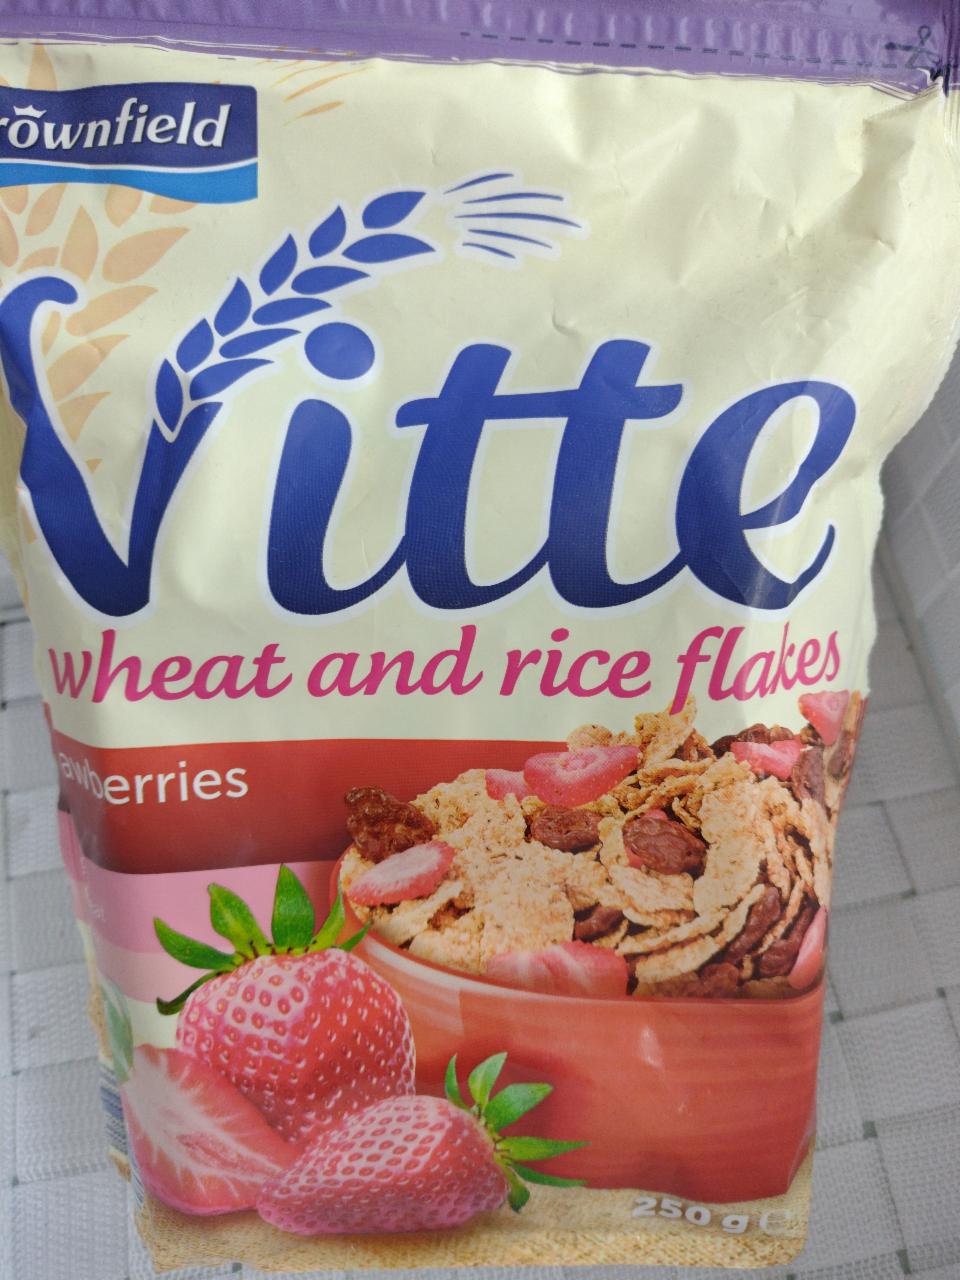 Fotografie - Crownfield Vitte wheat and rice flakes strawberries